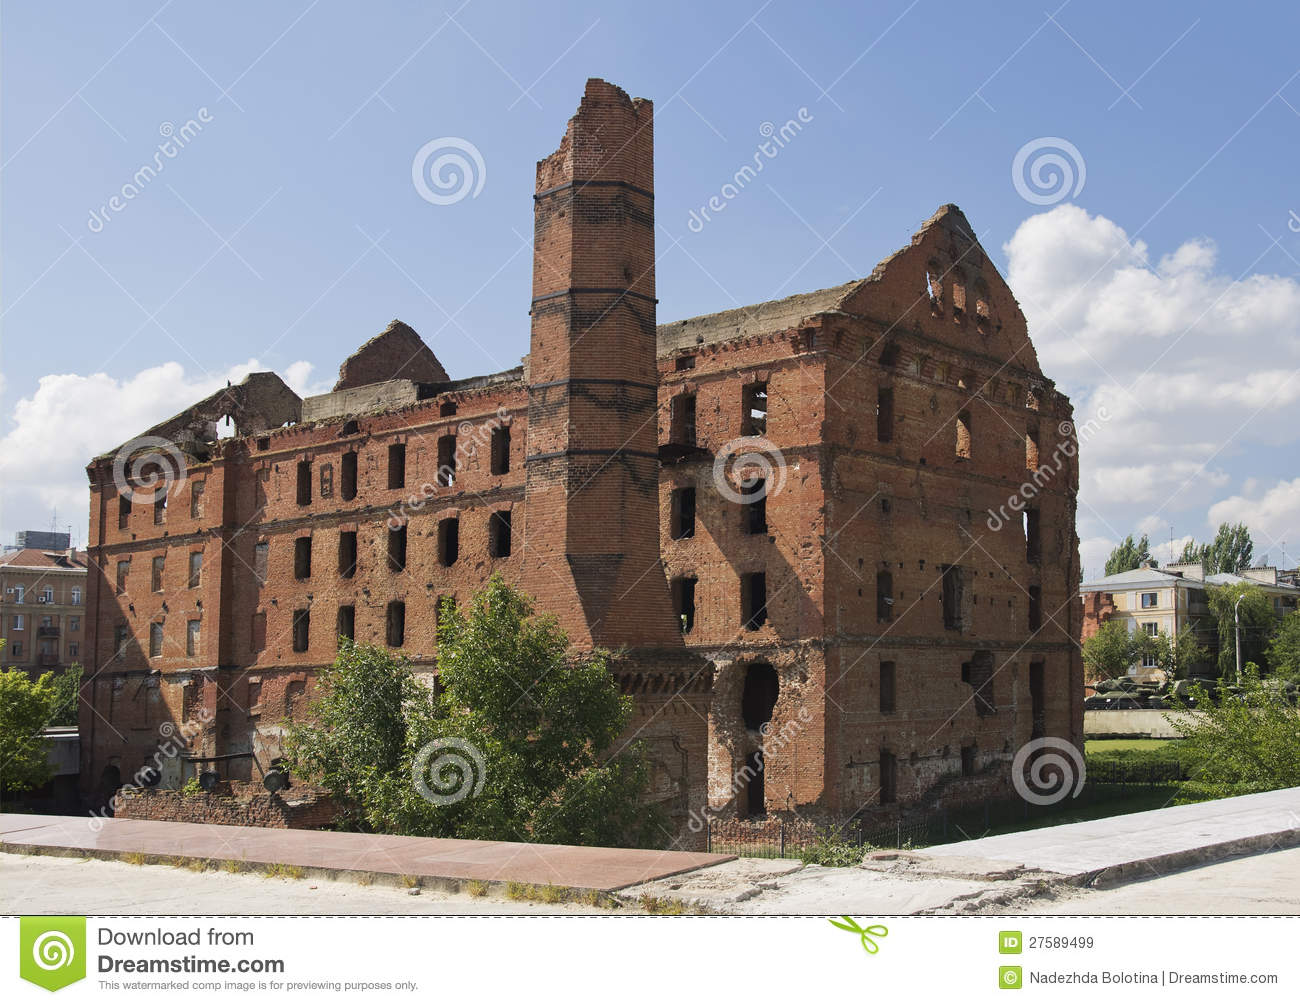 Old Mill In Volgograd Royalty Free Stock Images   Image  27589499